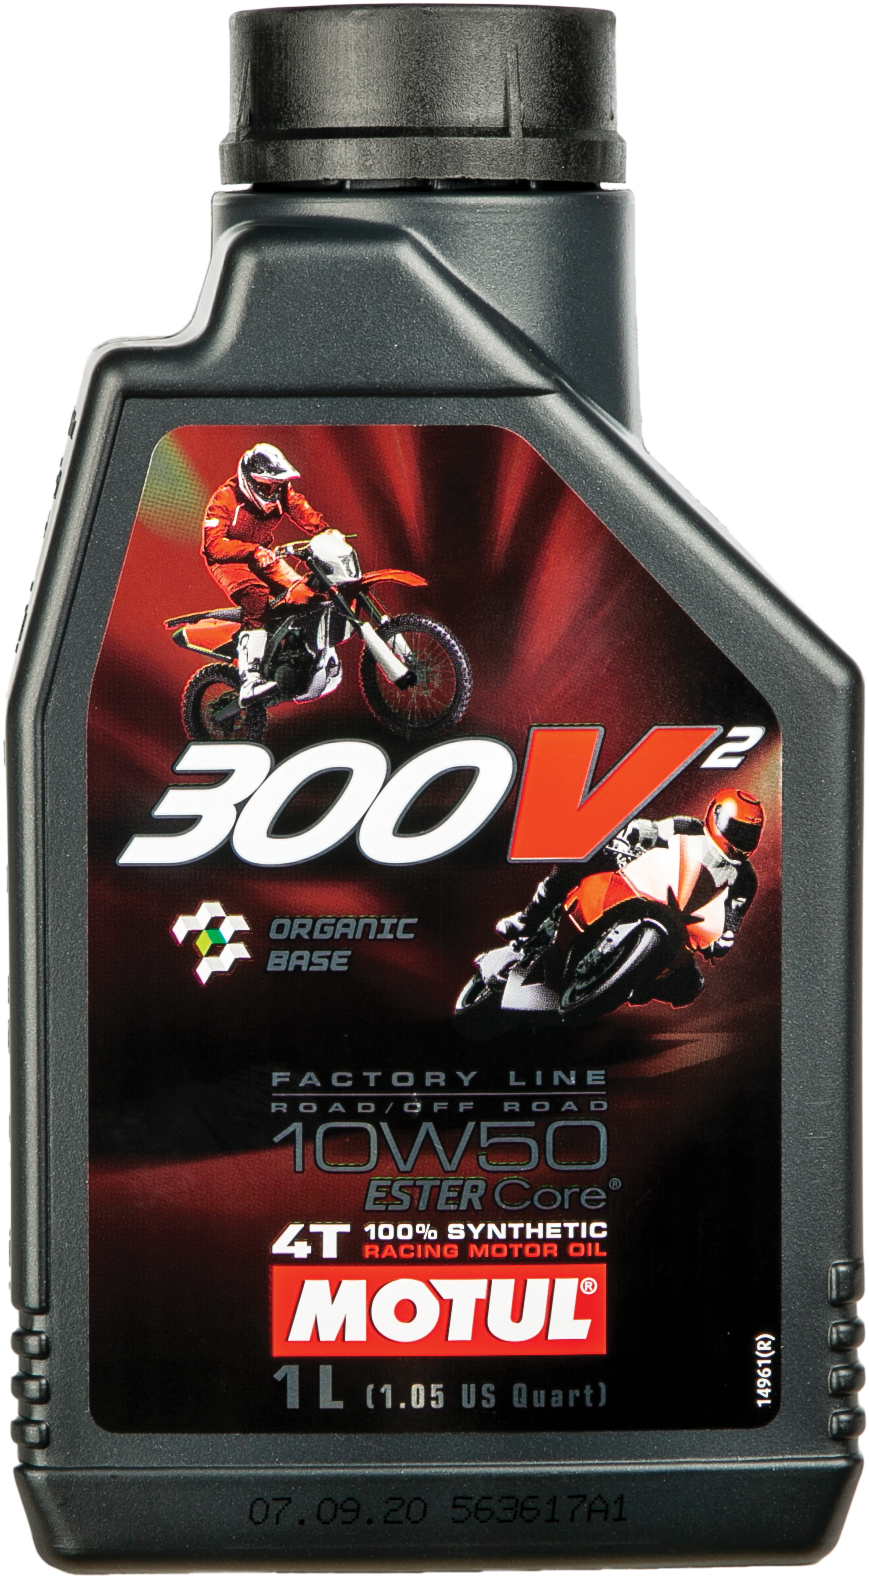 300V2 4T COMPETITION SYNTHETIC OIL 10W50 1 LT